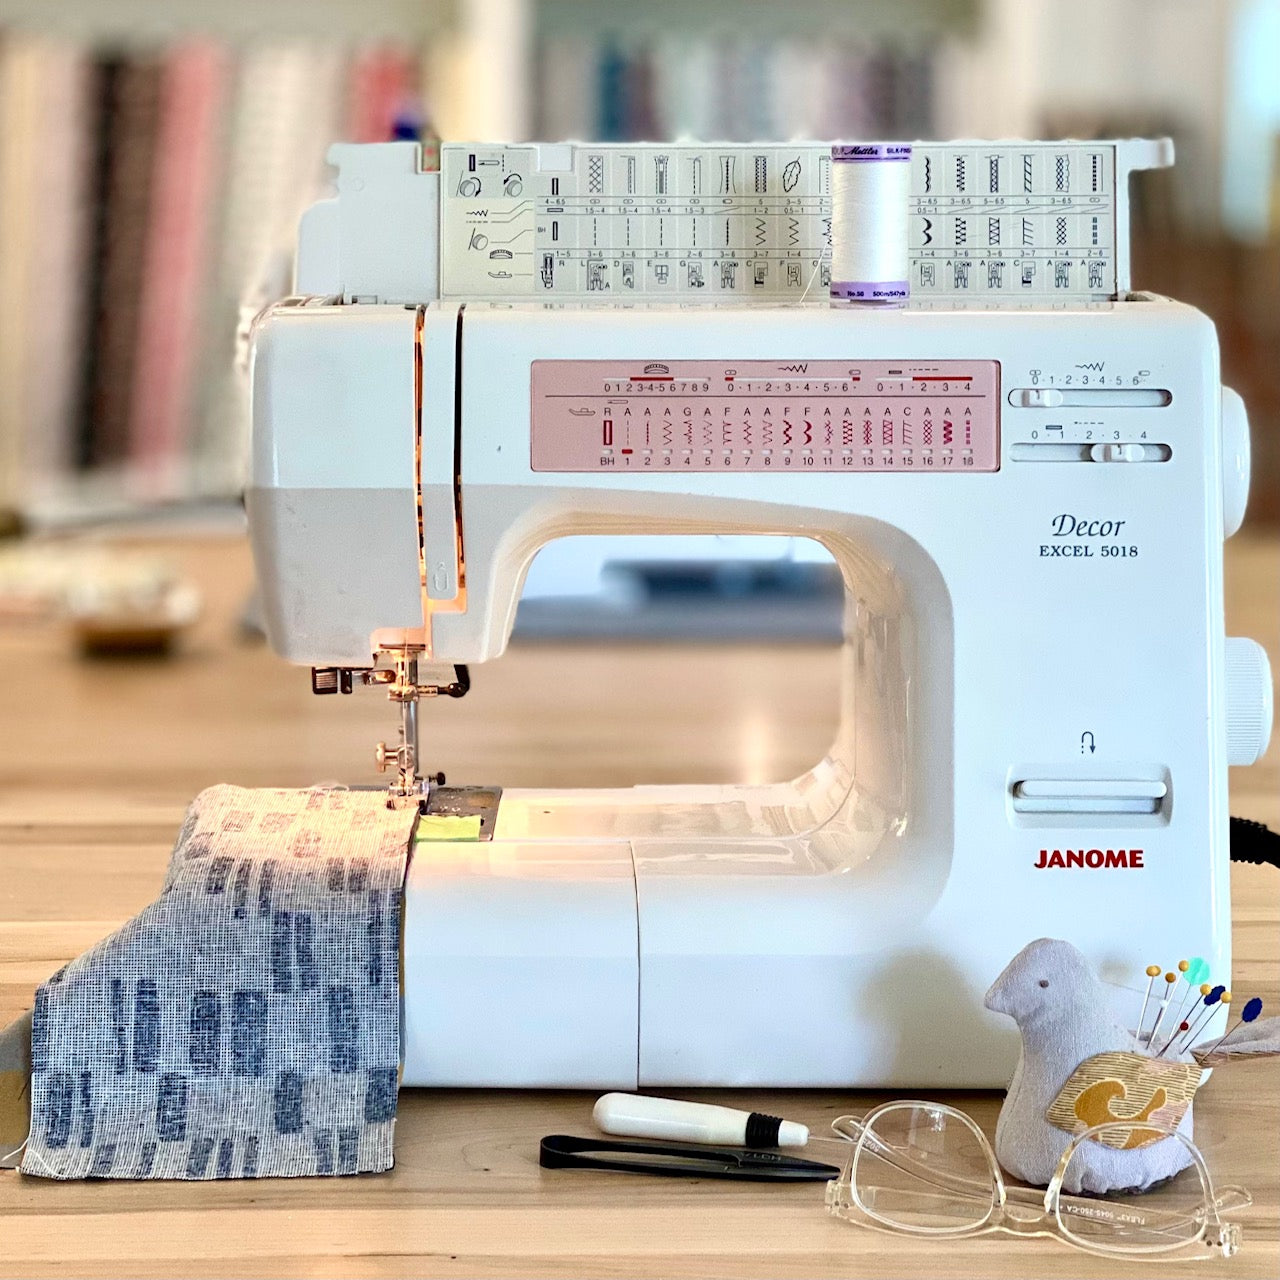 Sewing Machine Basics & Learn to Sew Series, Begins Thursday February 2nd, 12:30pm - 3:30pm